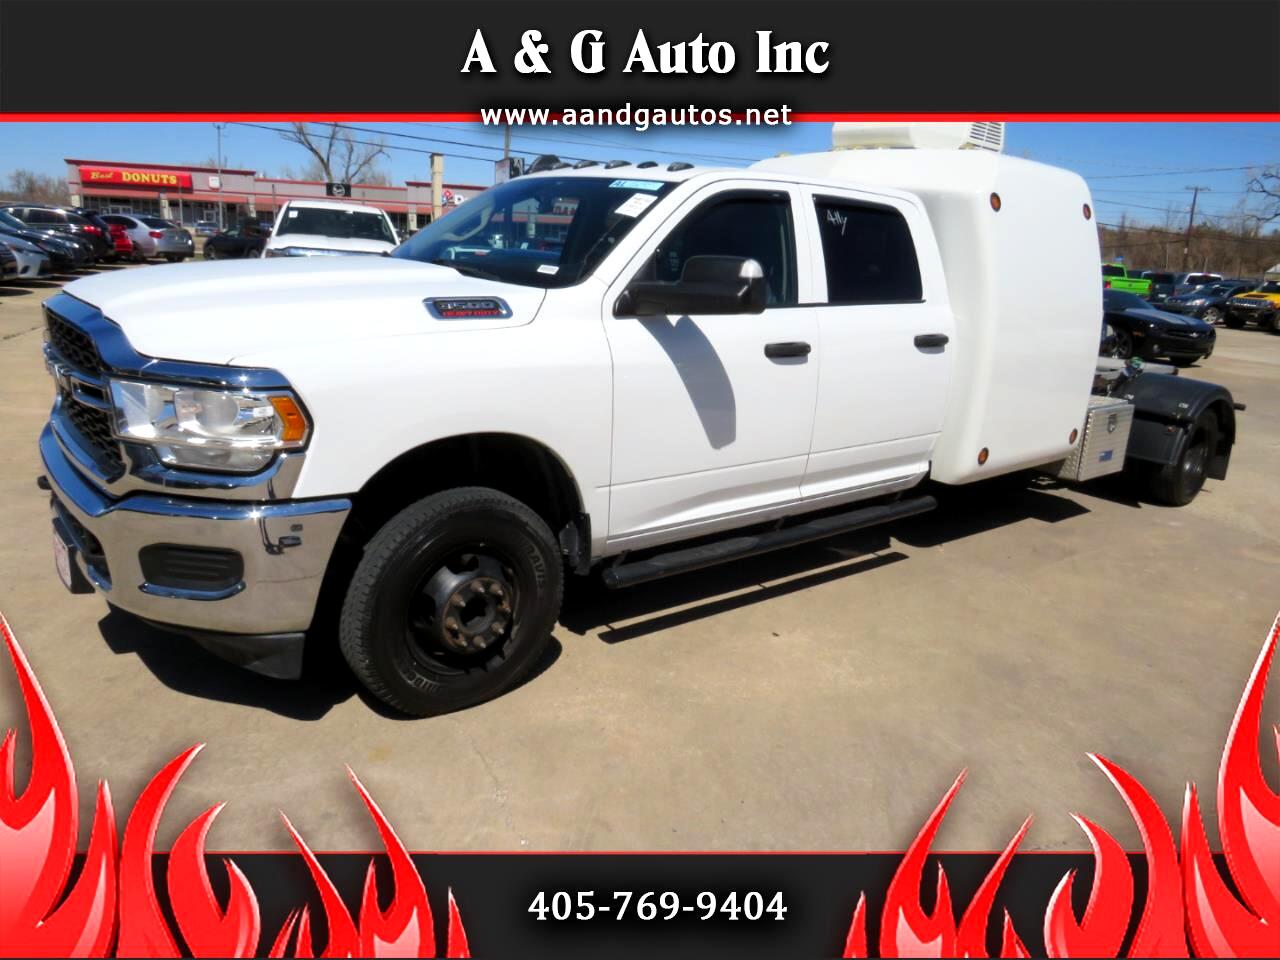 2019 Dodge Ram 3500 for sale in Oklahoma City OK 73141 by A & G Auto Inc